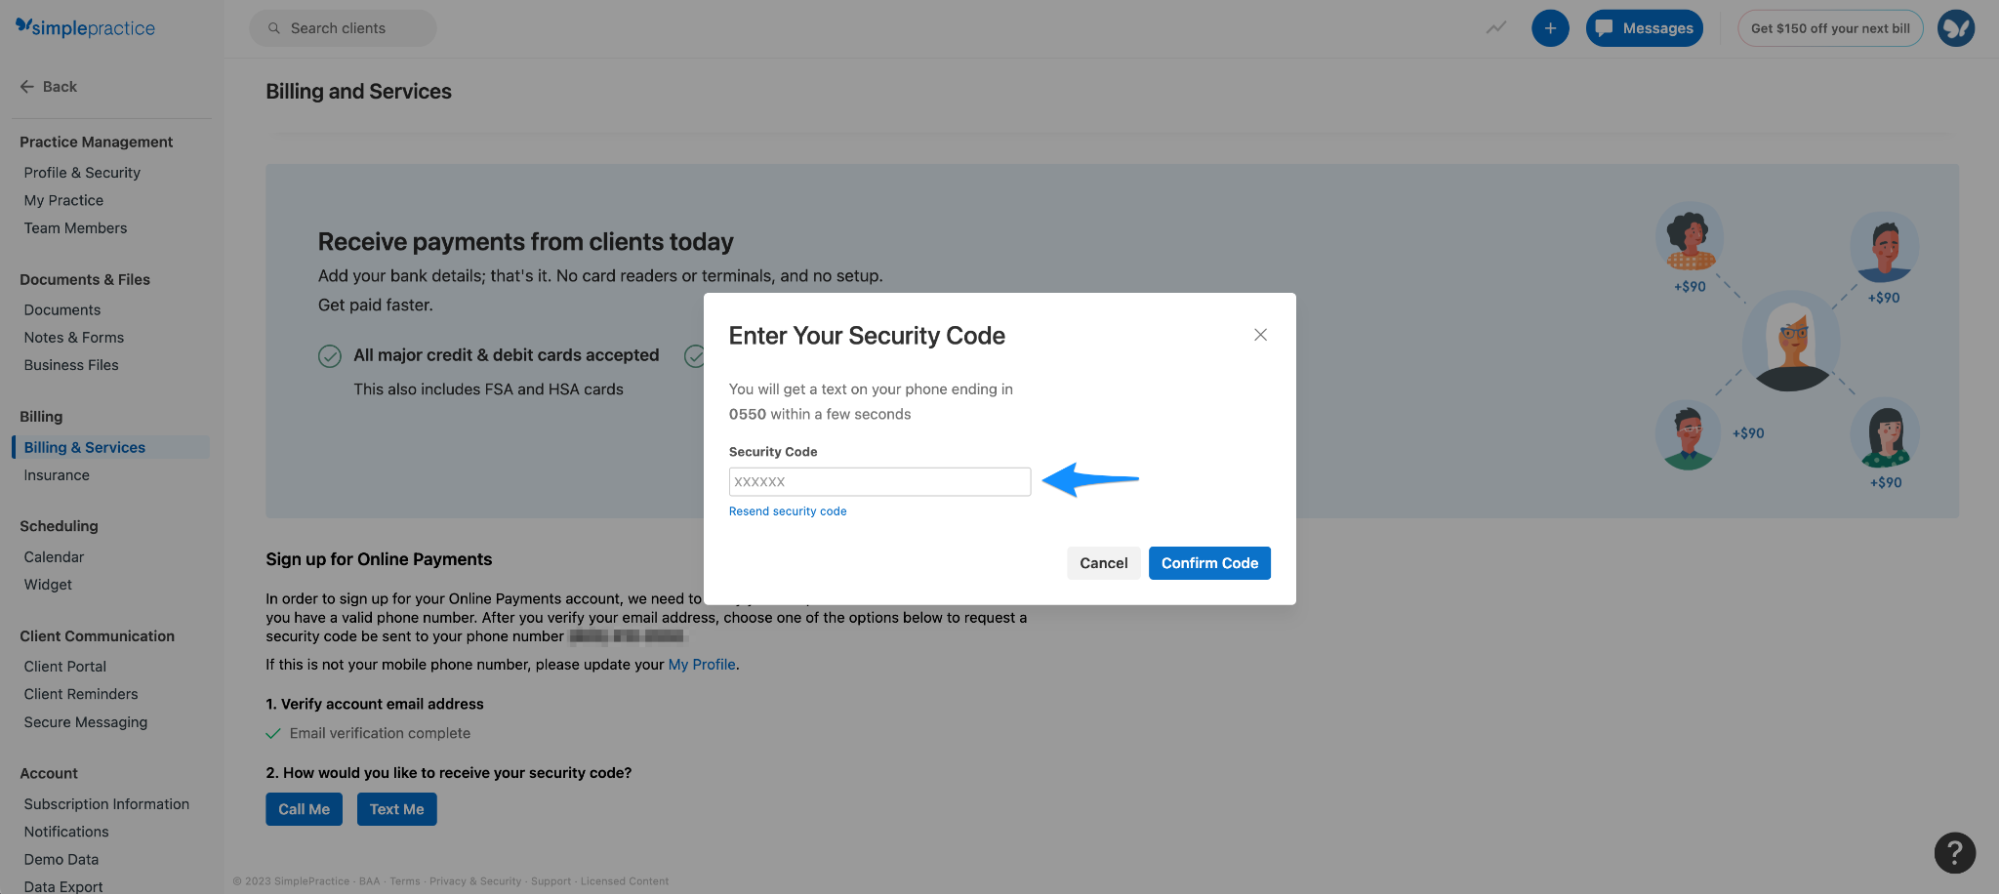 securitycode.simplepractice.onlinepayments.png